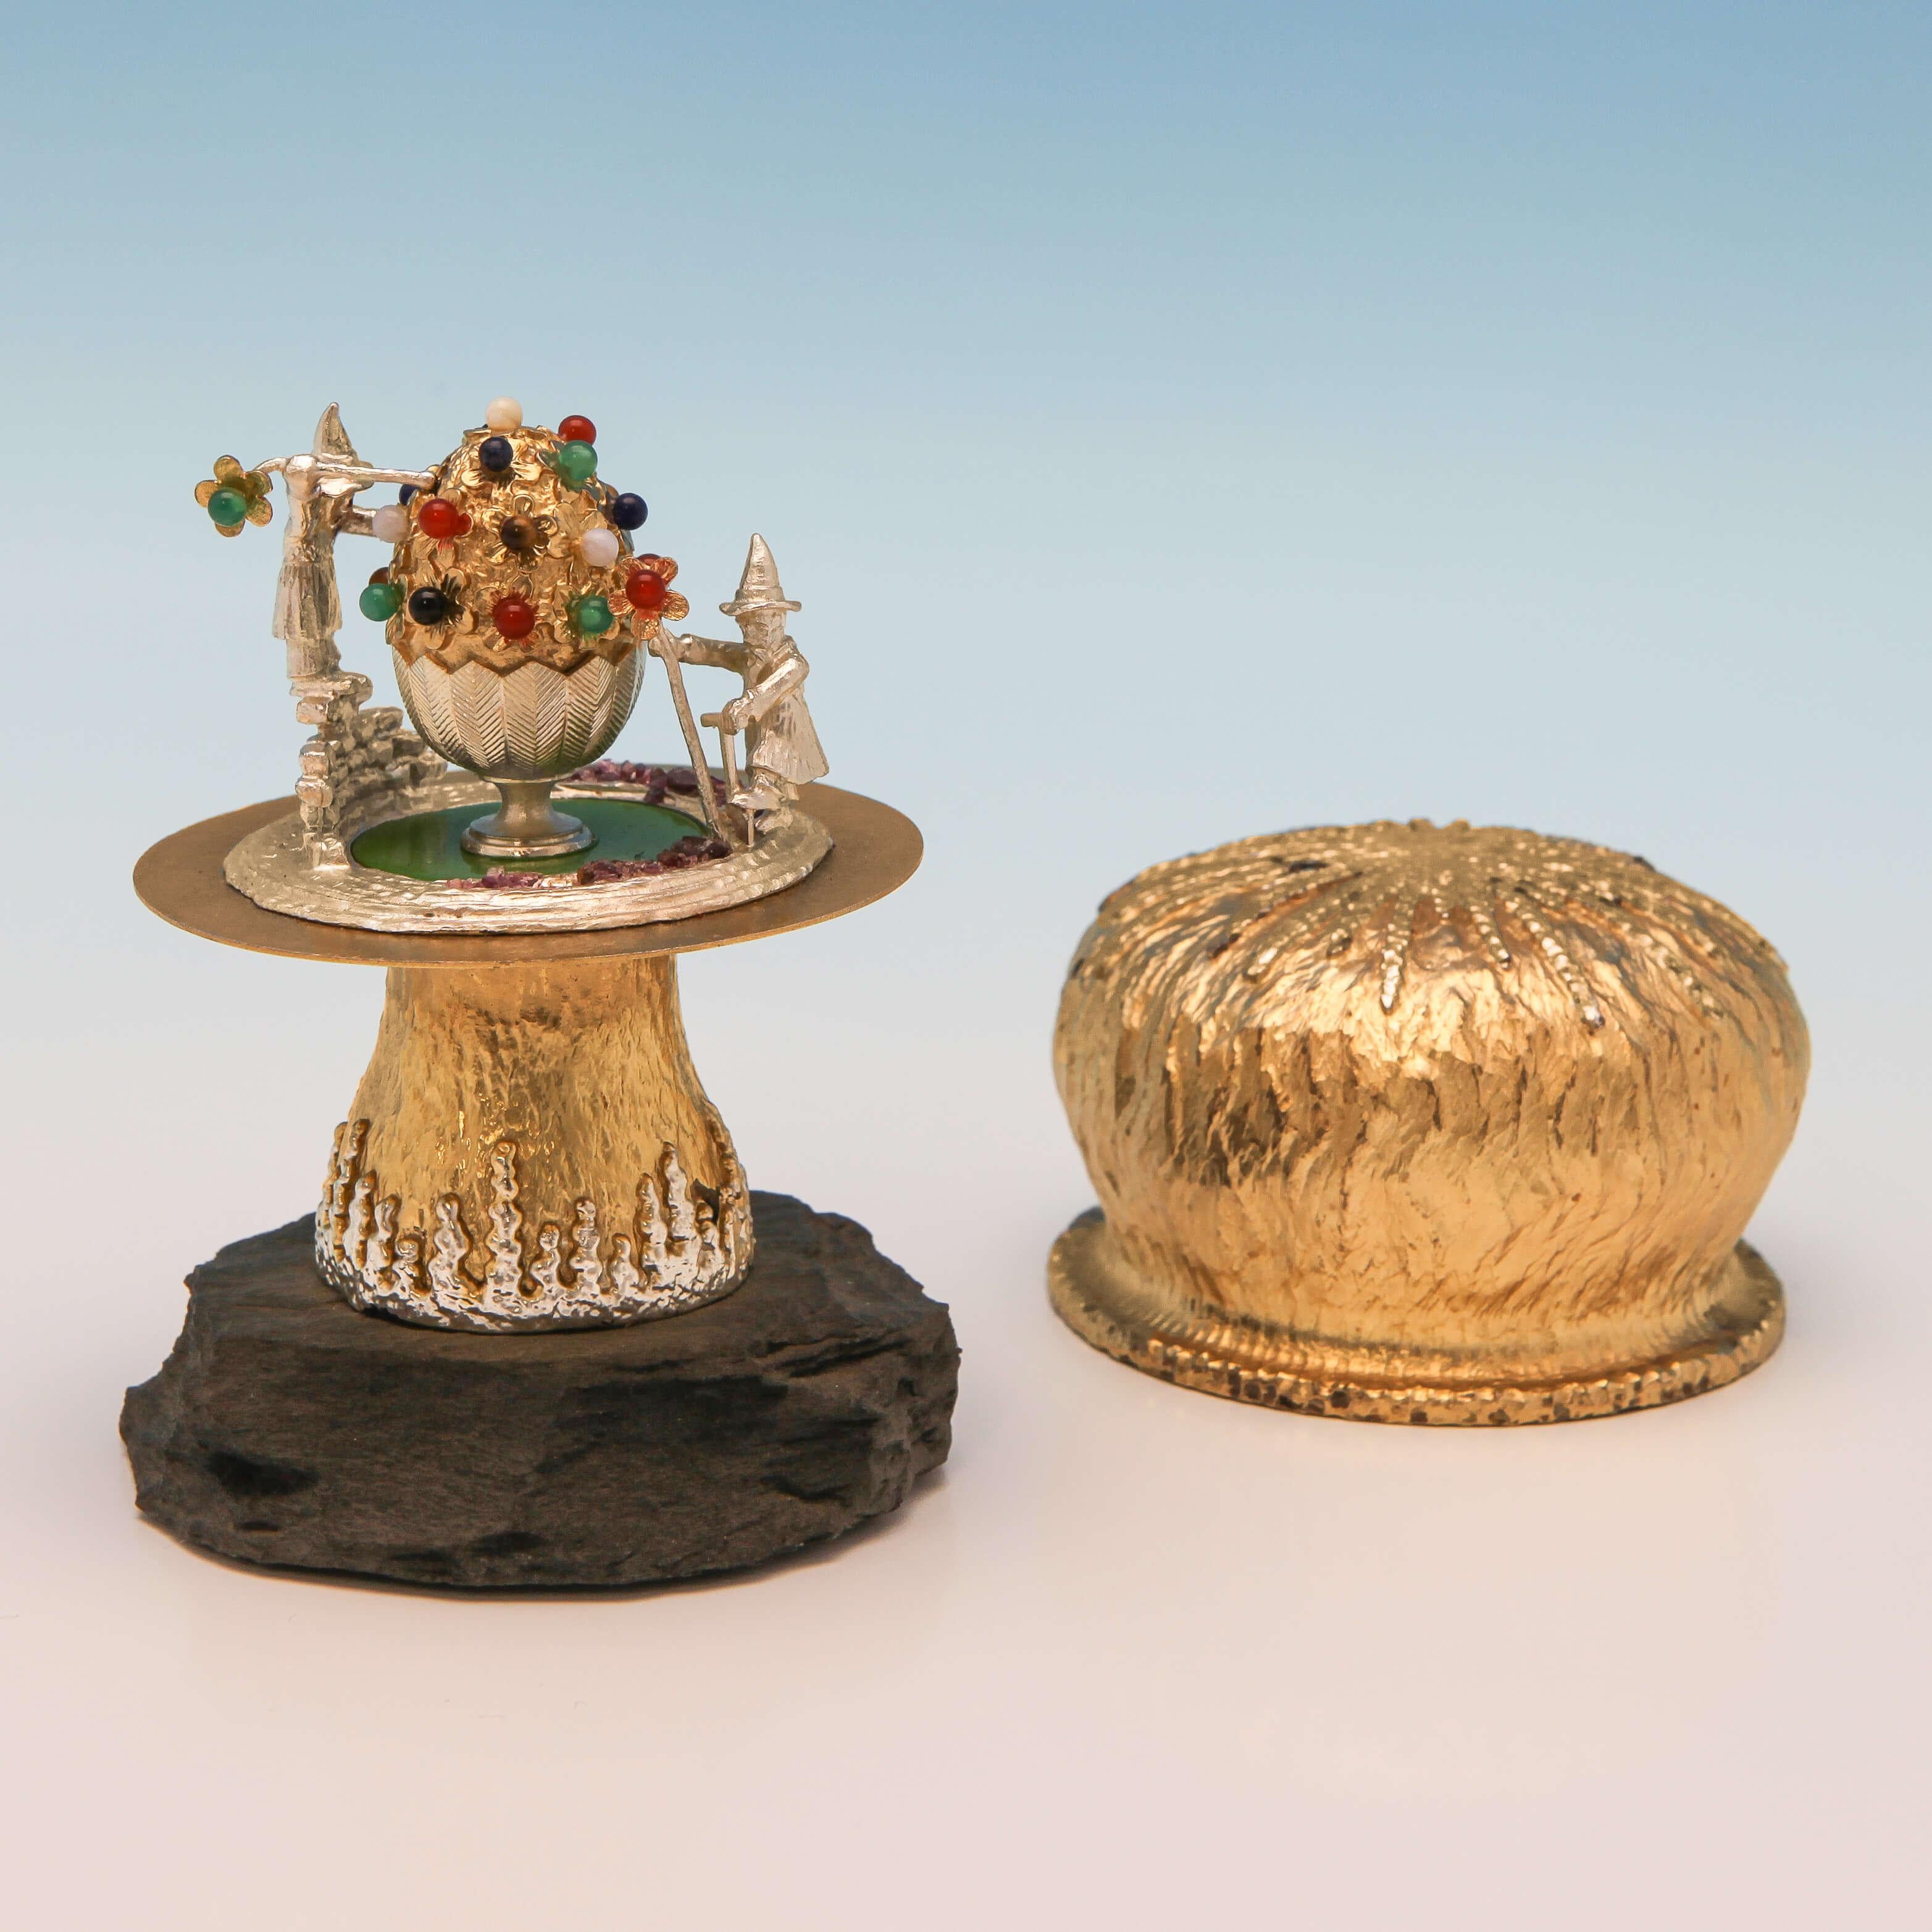 Hallmarked in London, 1982 by Christopher Lawrence, this fun and collectible sterling silver gilt novelty mushroom has a lift off cap, revealing two elves decorating an egg bejewelled in semi-precious stones. It stands on a slate base and measures